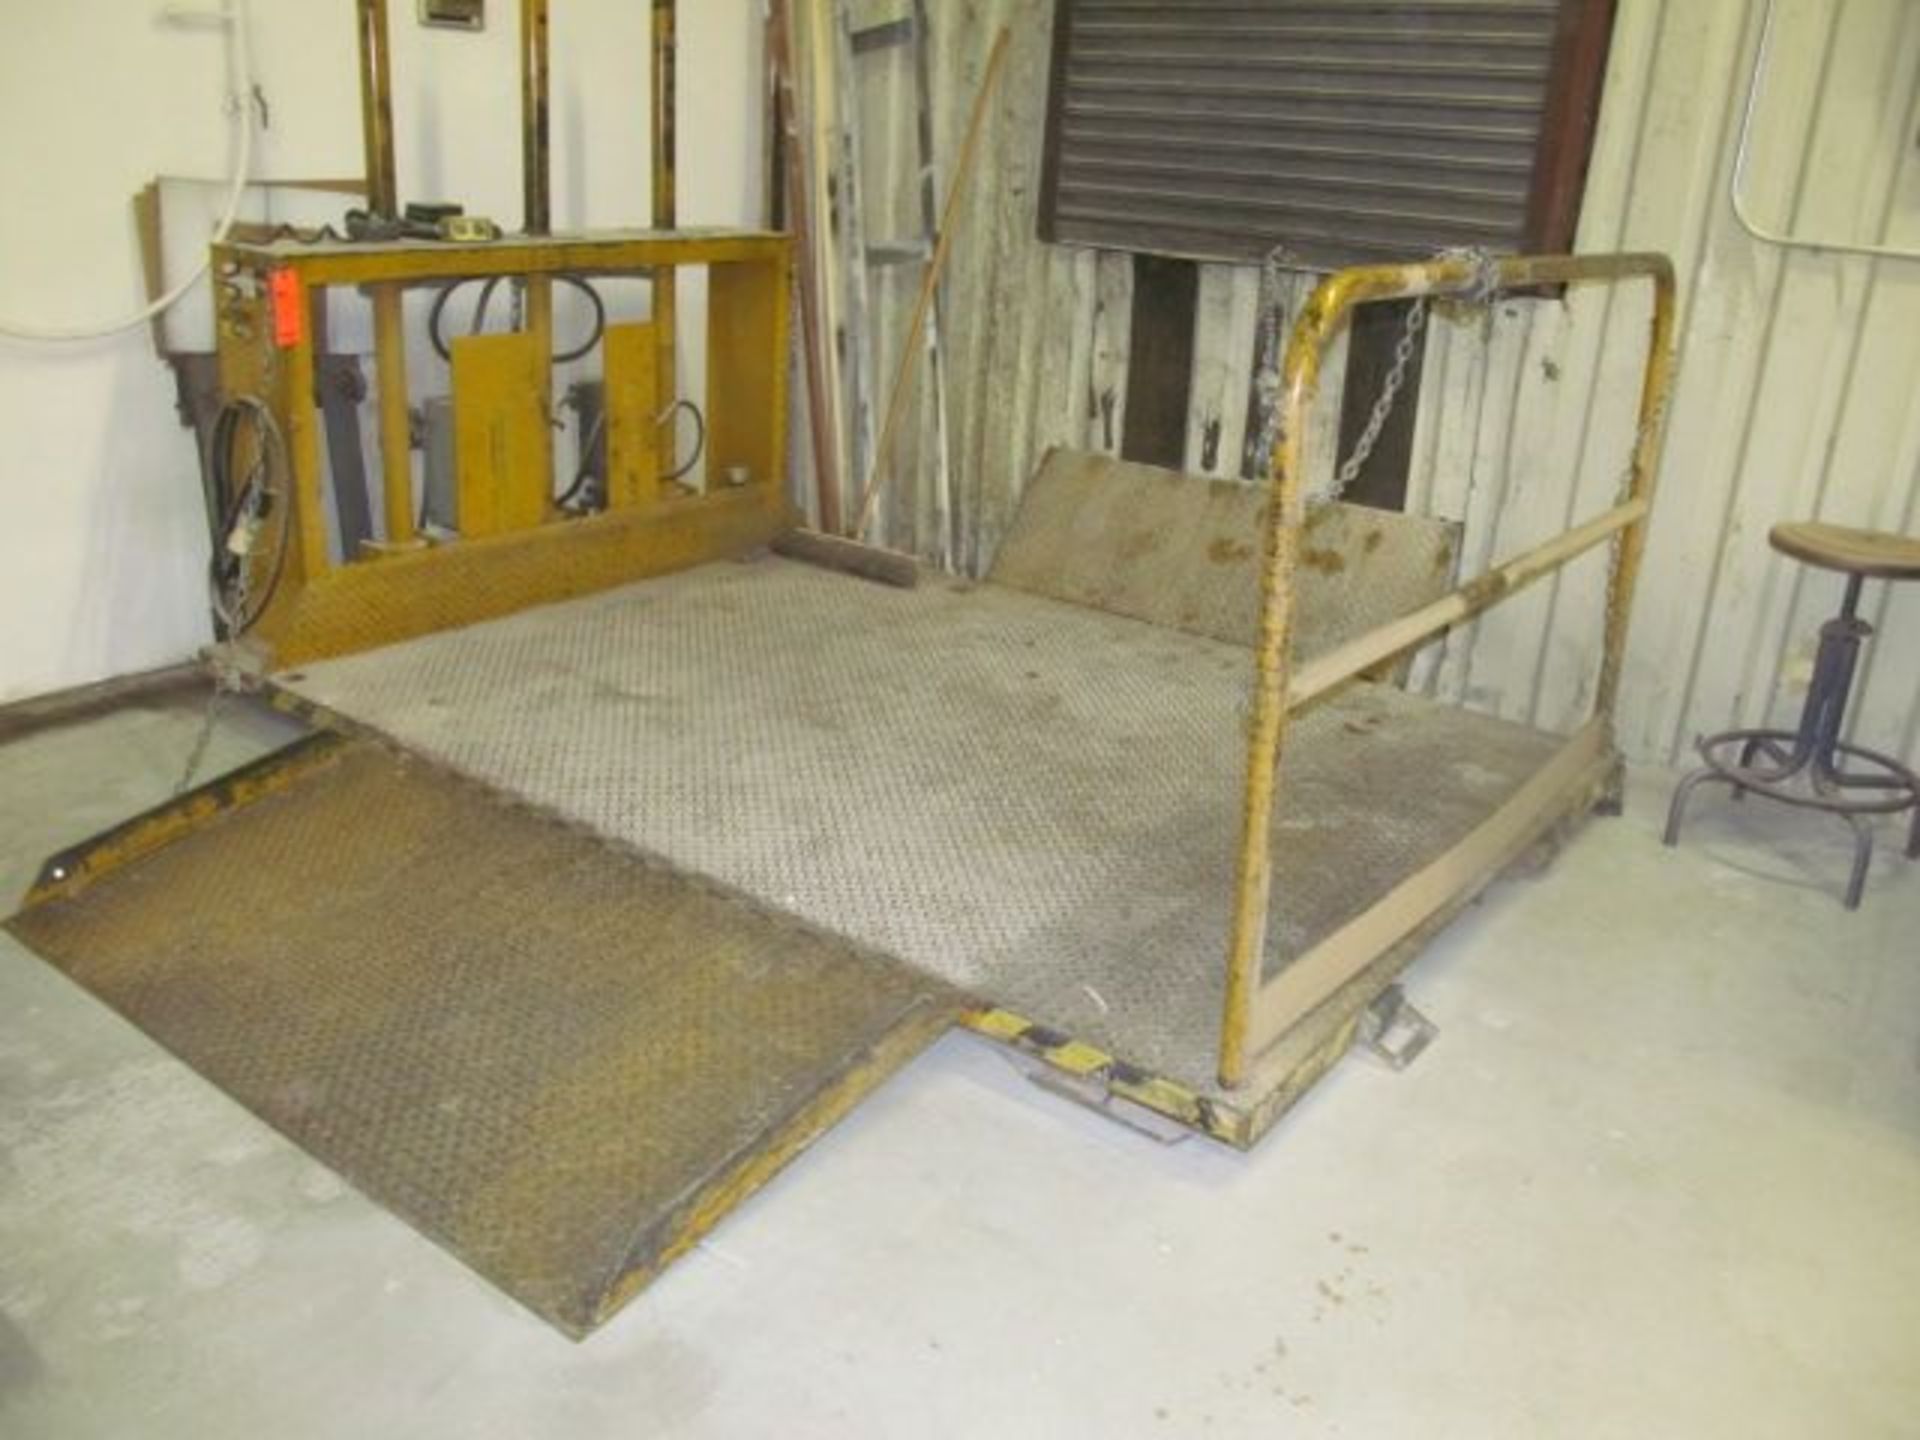 Electric hydraulic platform lift, Make unknown, 8' X 6', with 4'H cap, with ramp and safety rail